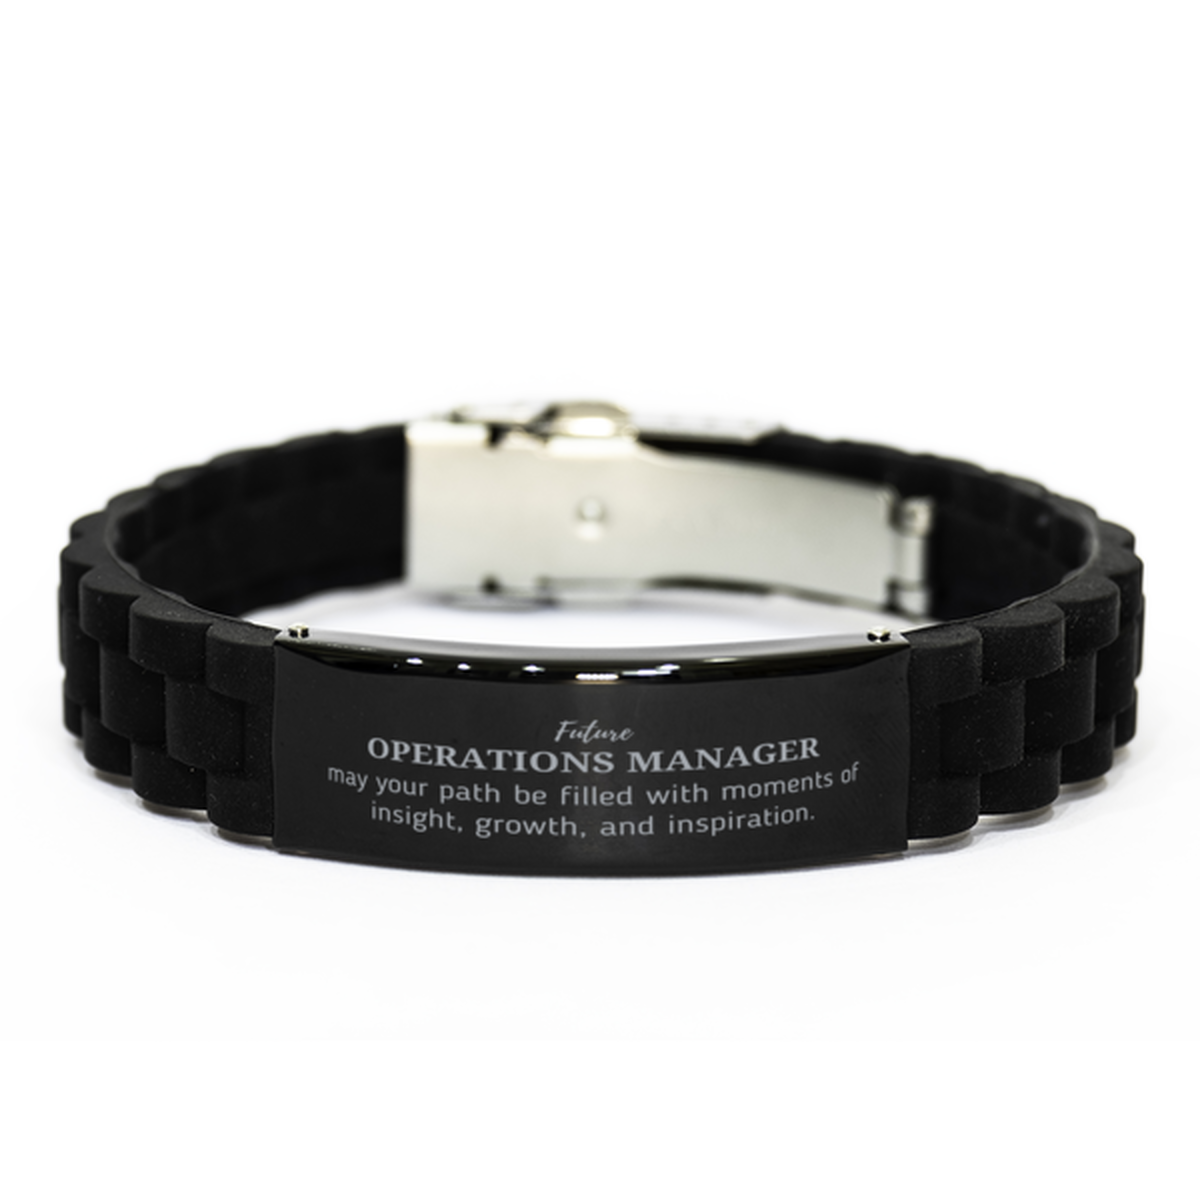 Future Operations Manager Gifts, May your path be filled with moments of insight, Graduation Gifts for New Operations Manager, Christmas Unique Black Glidelock Clasp Bracelet For Men, Women, Friends